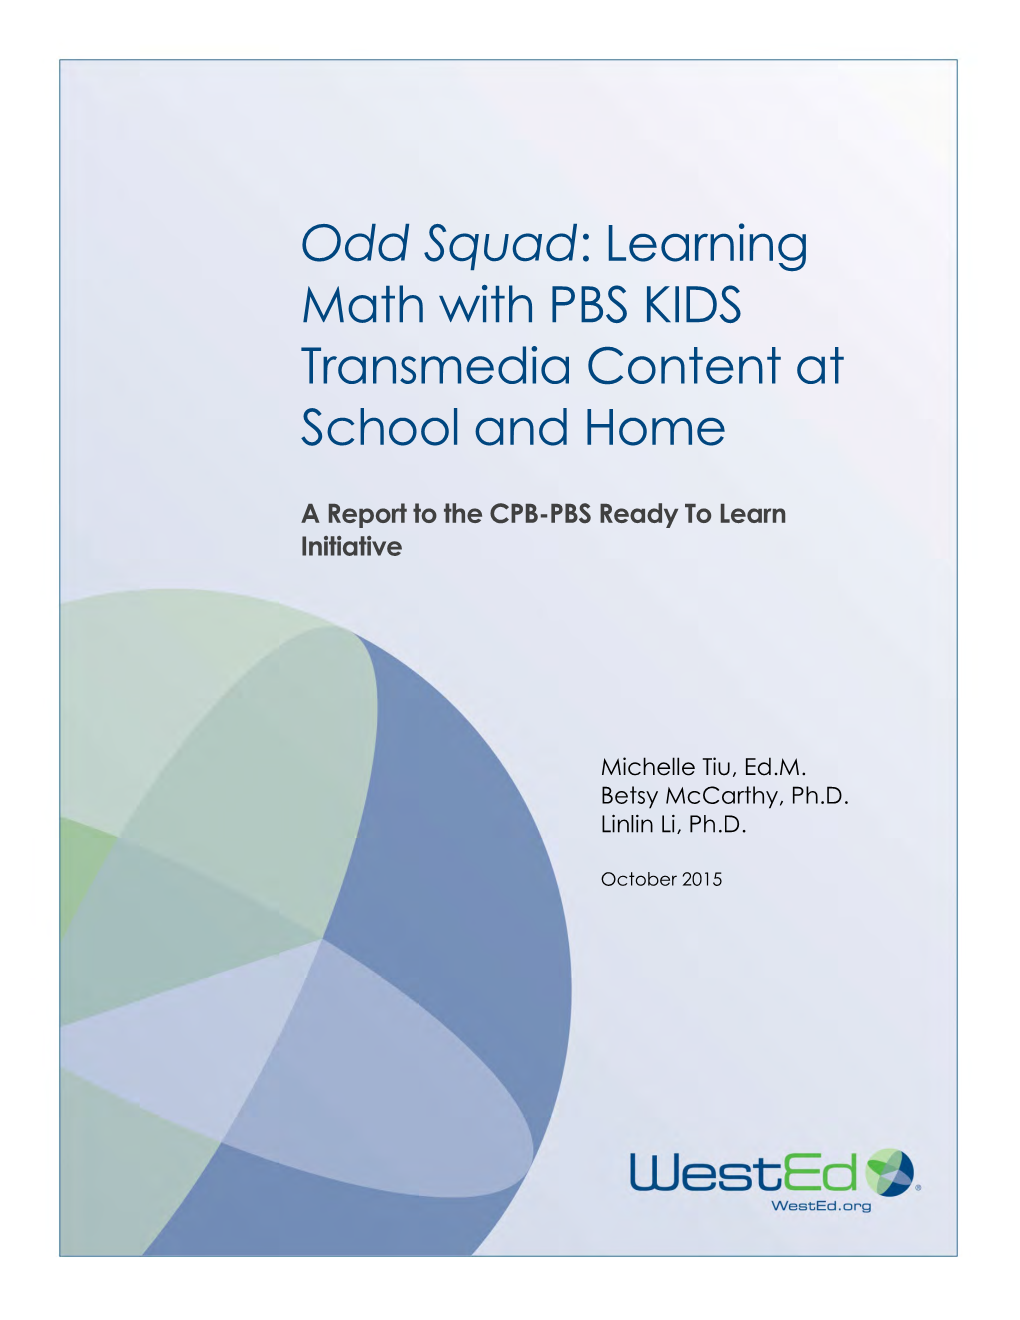 Odd Squad: Learning Math with PBS KIDS Transmedia Content at School and Home